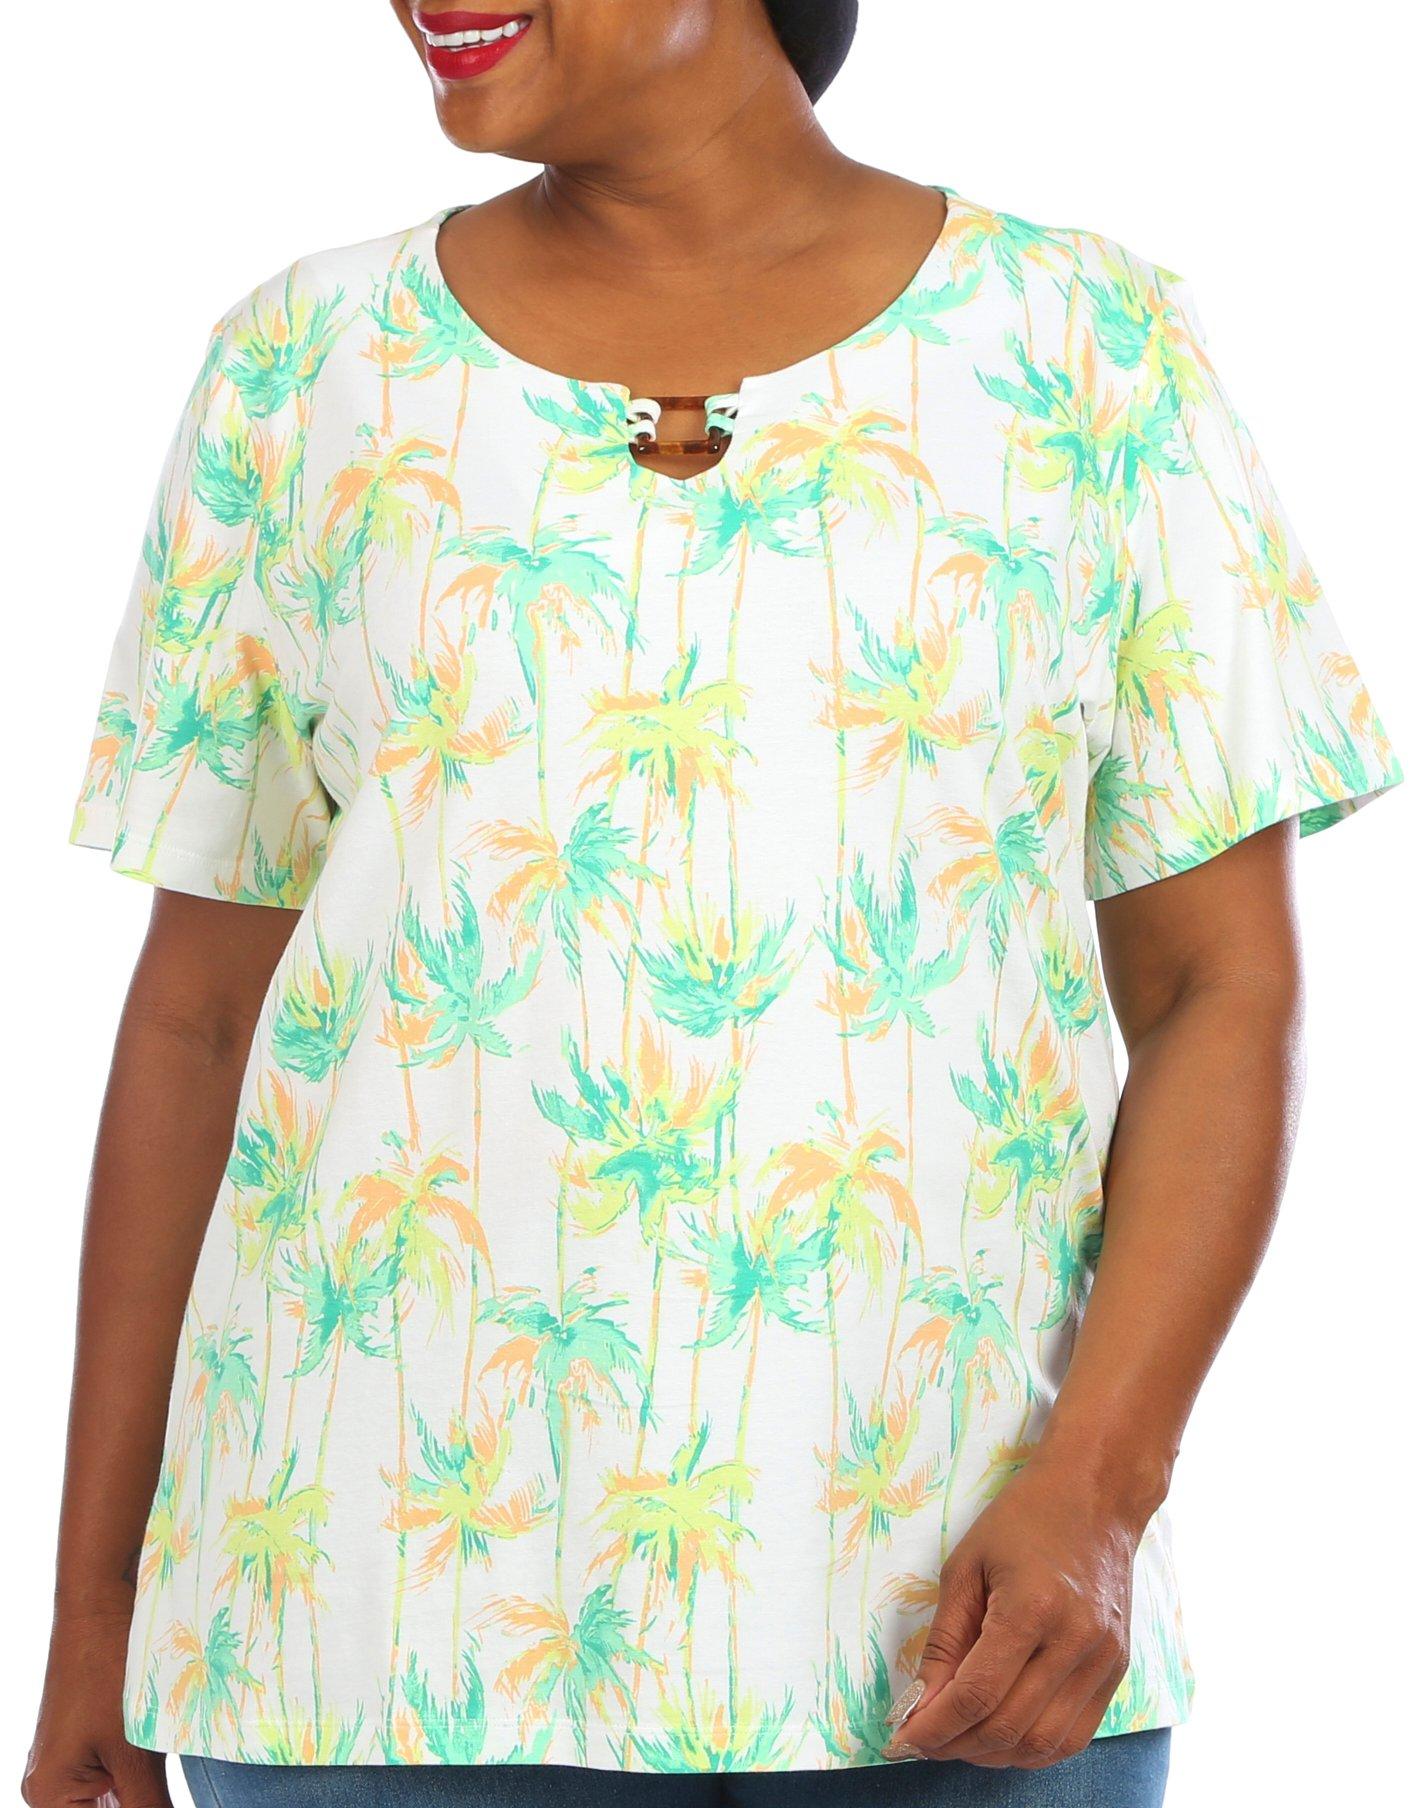 Coral Bay Plus Palms Square-Ring Keyhole Short Sleeve Top